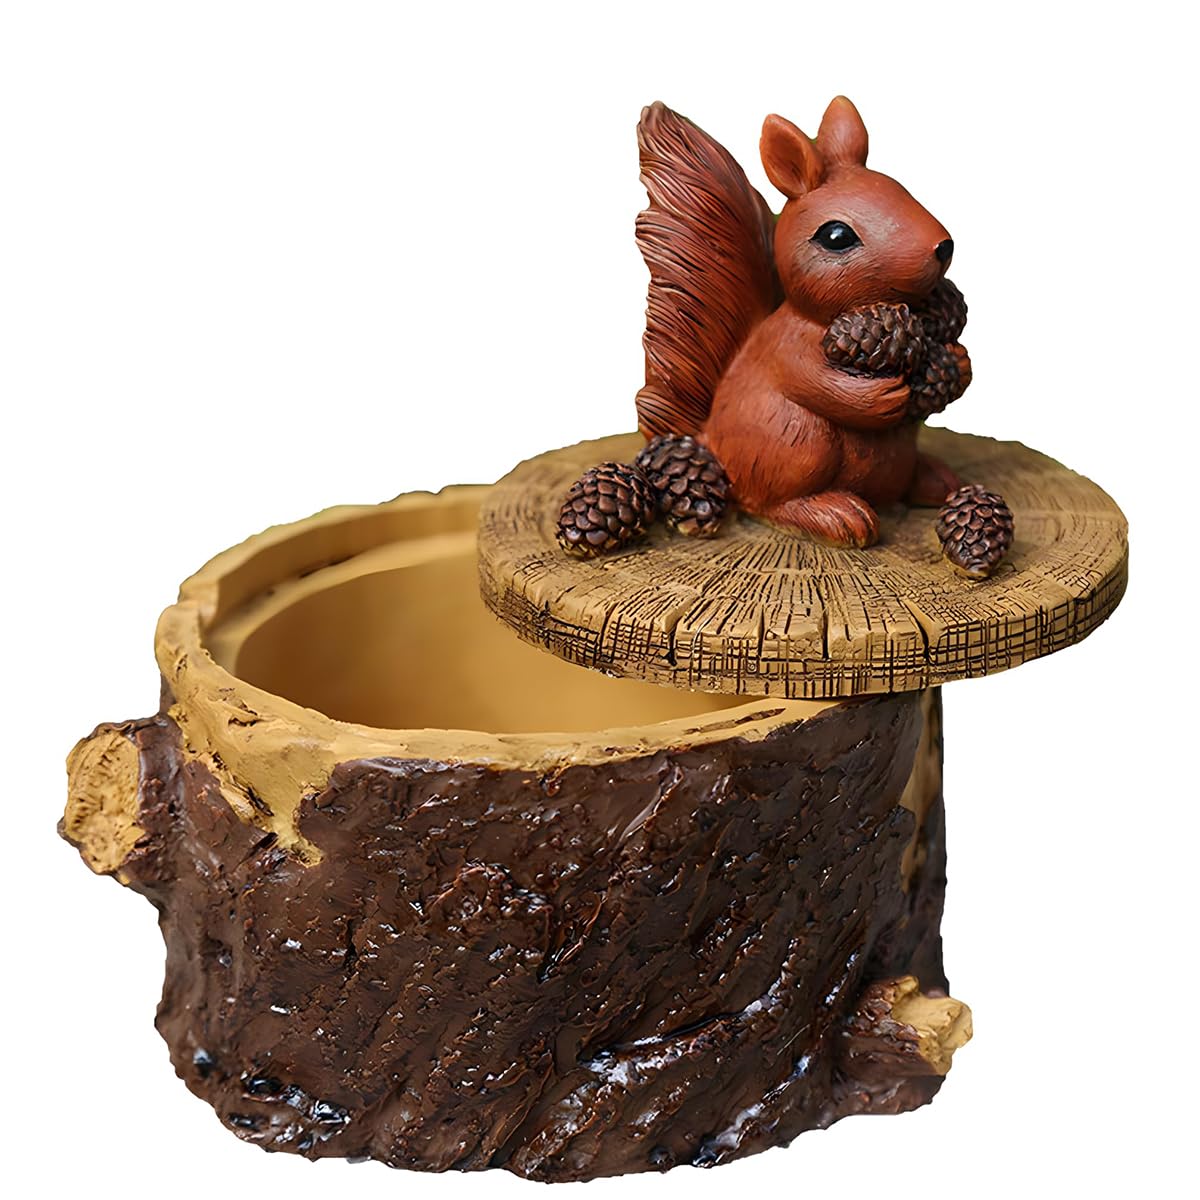 ToiM Stable Outdoor Garden Ashtray with Lid for Cigarette, Adorable Office Home Accessories Organizer (Squirrel)